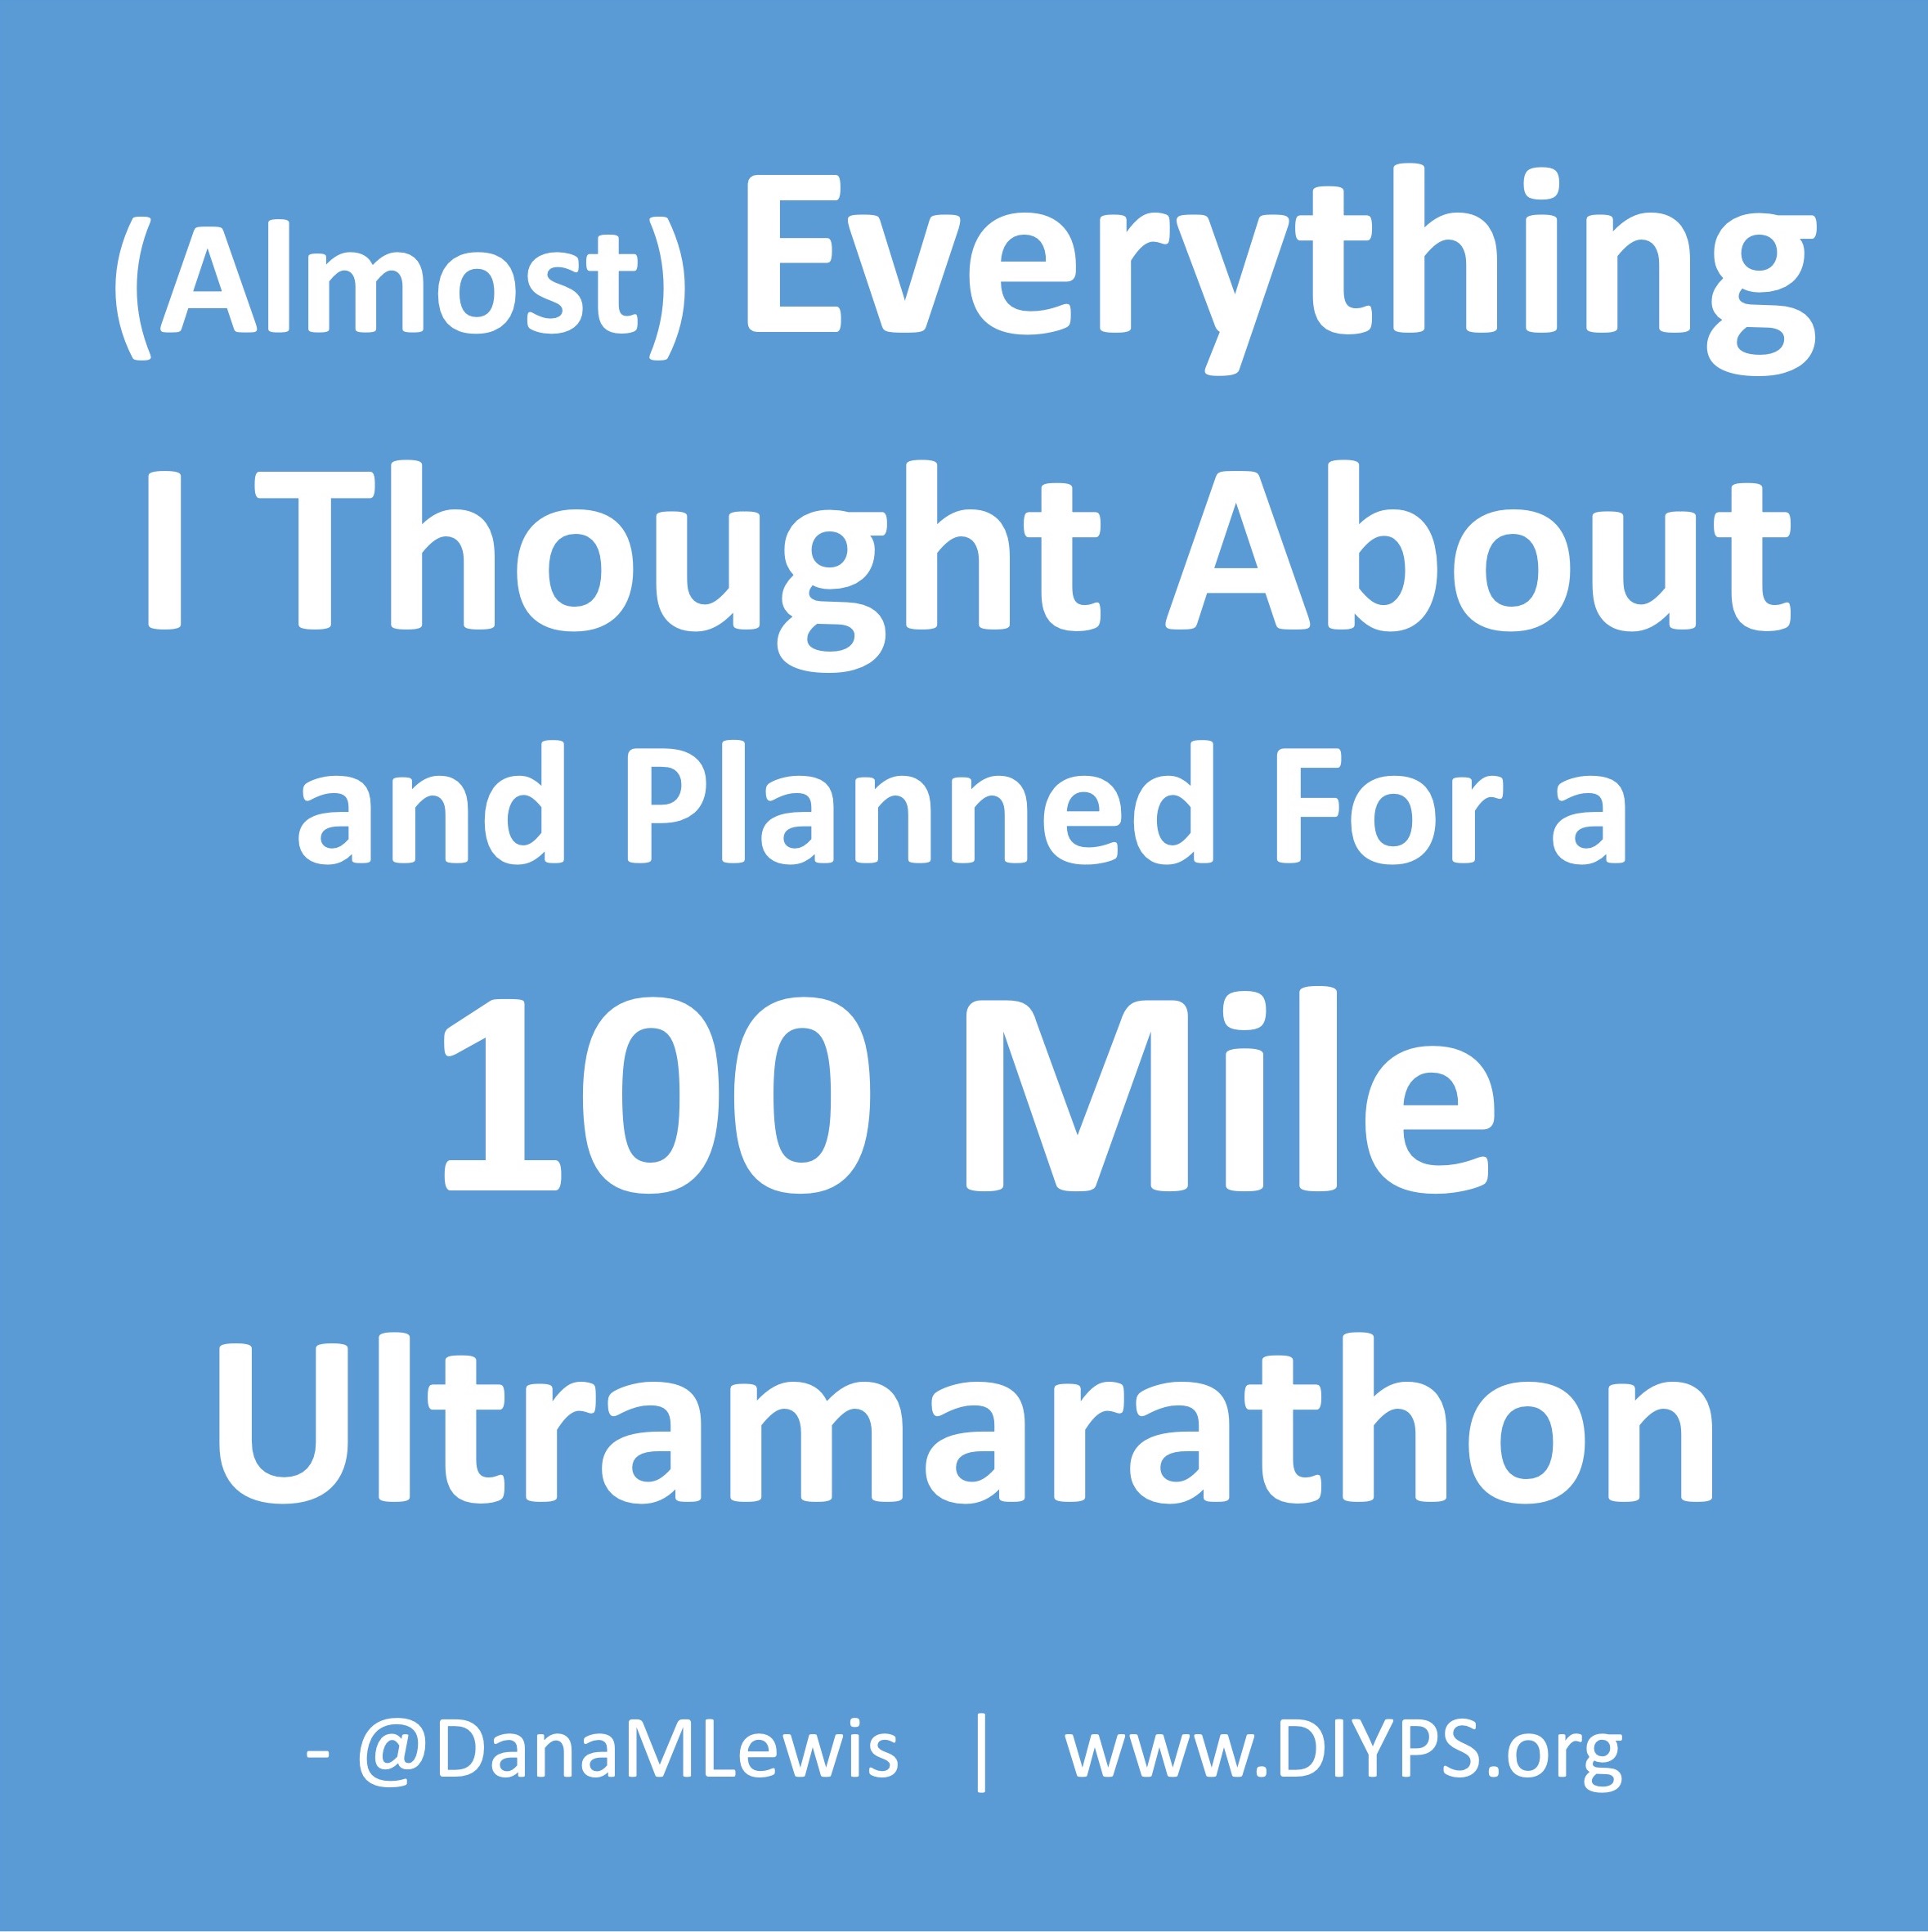 Almost everything I thought about and planned for a 100 mile ultramarathon, by Dana M. Lewis on DIYPS.org